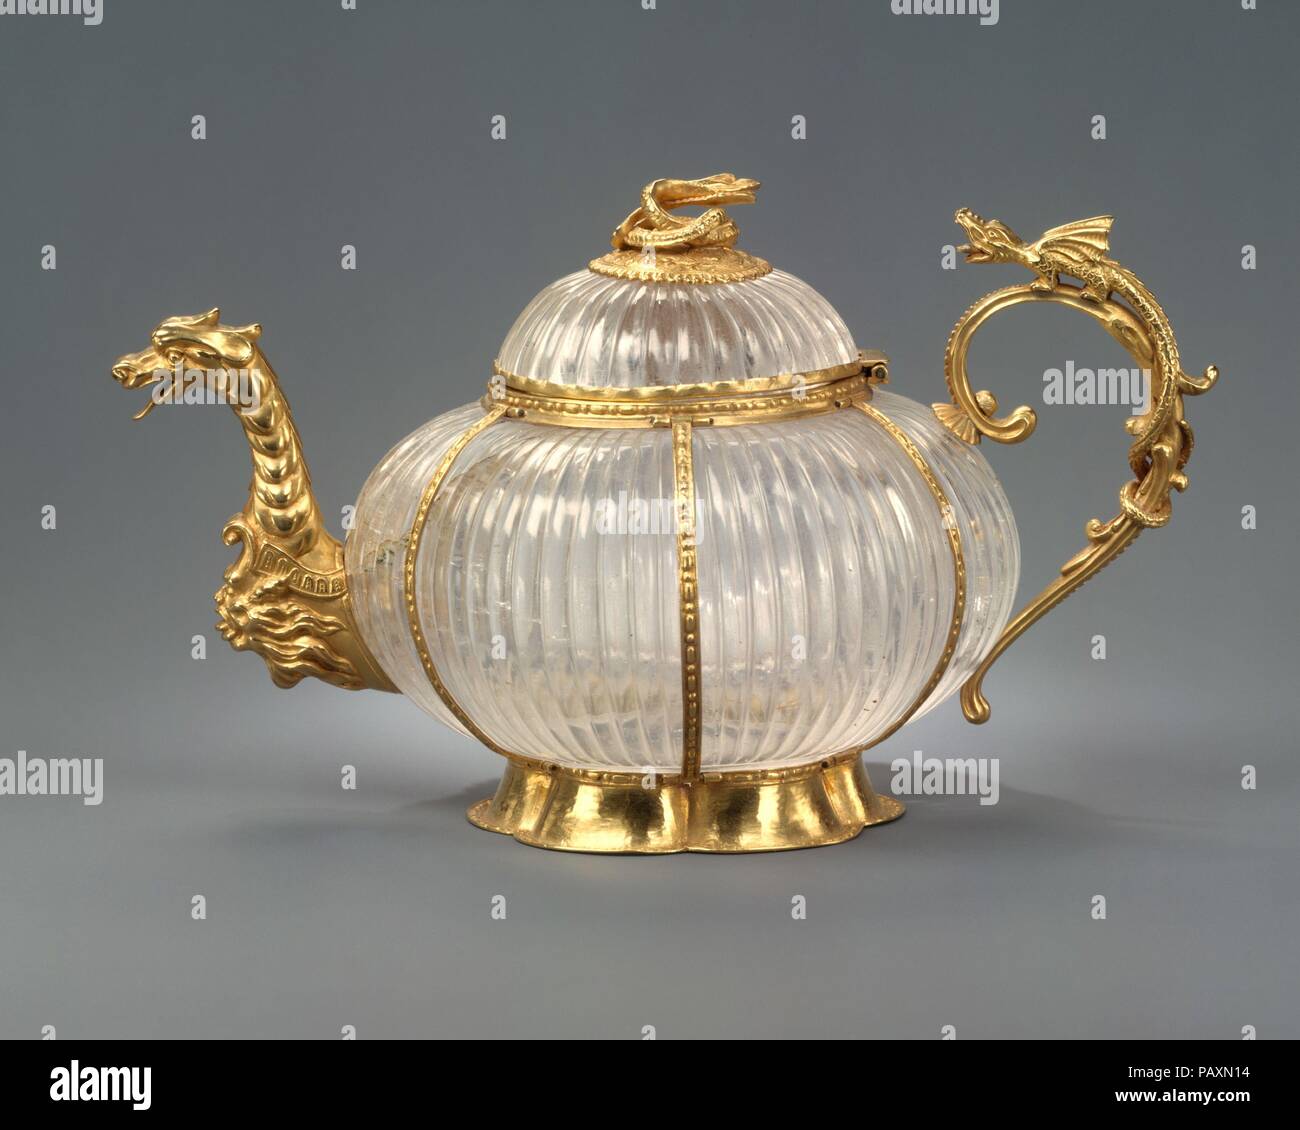 Teapot. Culture: German, Dresden mounts and Indian, Mughal crystal. Dimensions: Overall: 3 5/8 × 6 1/16 in. (9.2 × 15.4 cm). Date: rock crystal ca. 1700, mounts ca. 1720.  From the turn of the seventeenth century until about 1725, the Saxon court at Dresden flourished as a center for the production of fanciful decorative object sin which goldsmiths' work was combined with such varied and exotic materials as jade, rhinoceros horn, and emeralds. Each of these materials--like the ostrich eggs, coral, and coconut shells popular in the previous century-- symbolized contact with a remote part of the Stock Photo